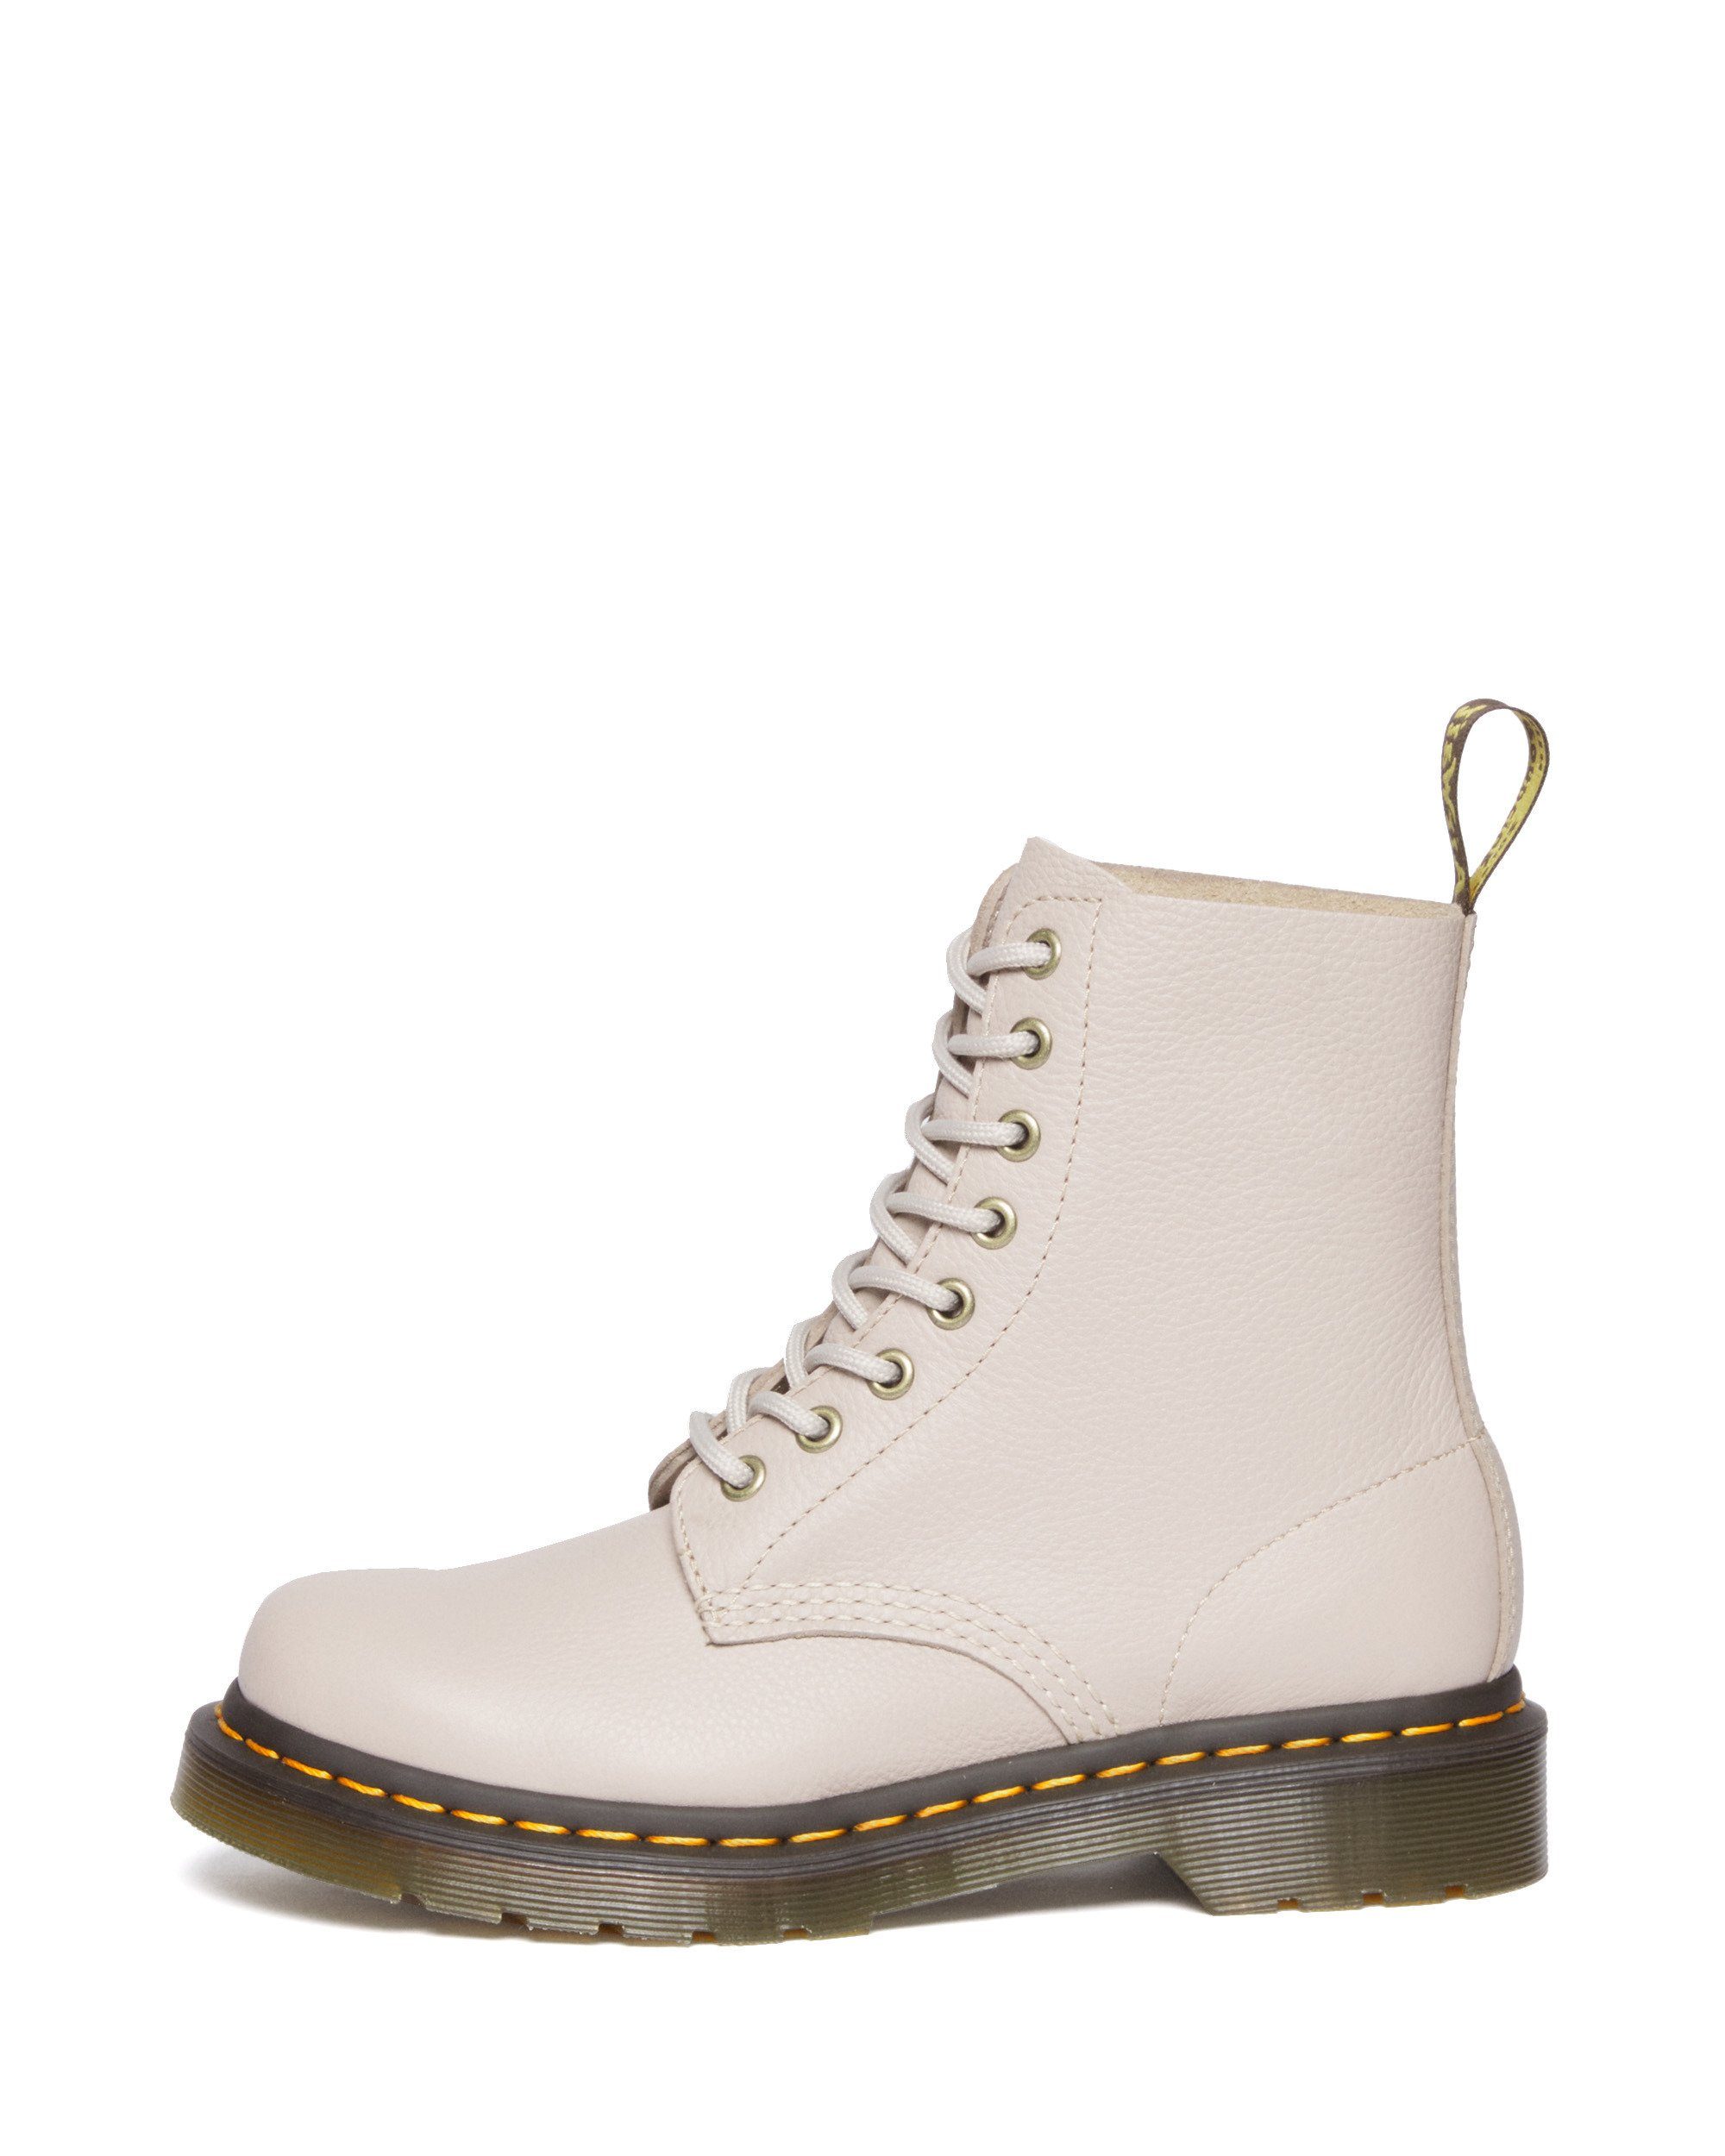 DR. MARTENS 1460 PASCAL Ankleboots (2-tlg) Taupe Virginia